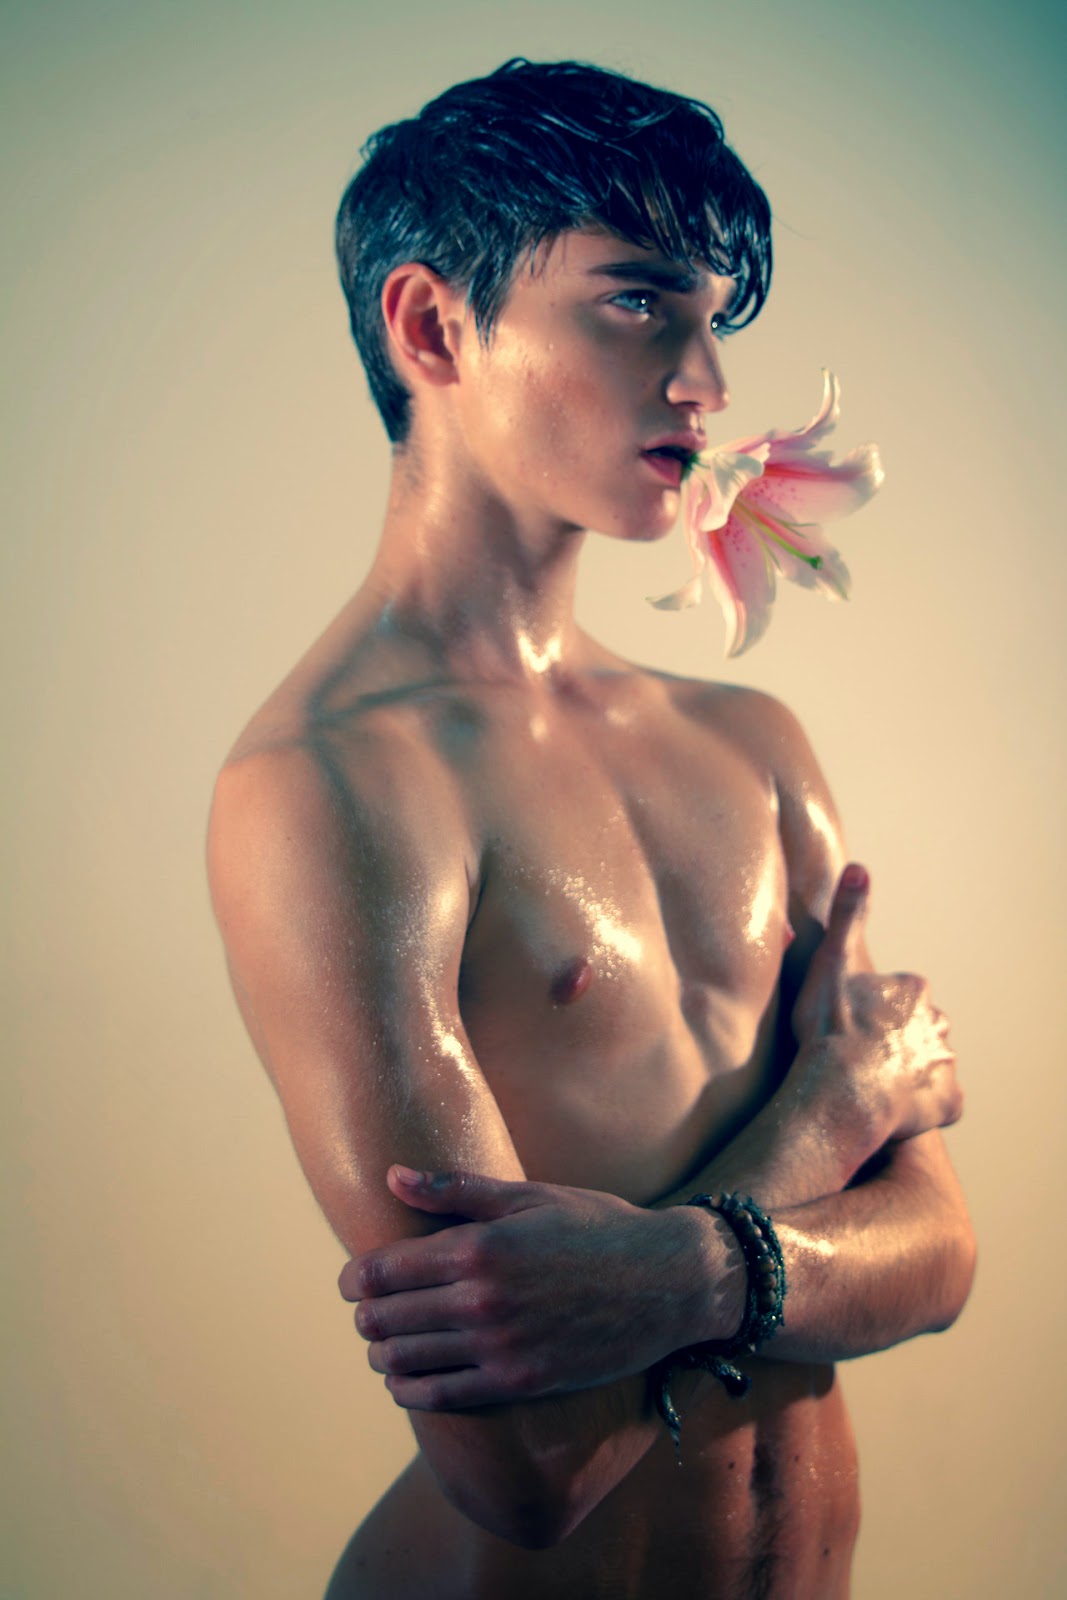 Beauty and Body of Male : Alexander Ferrario Profile 1